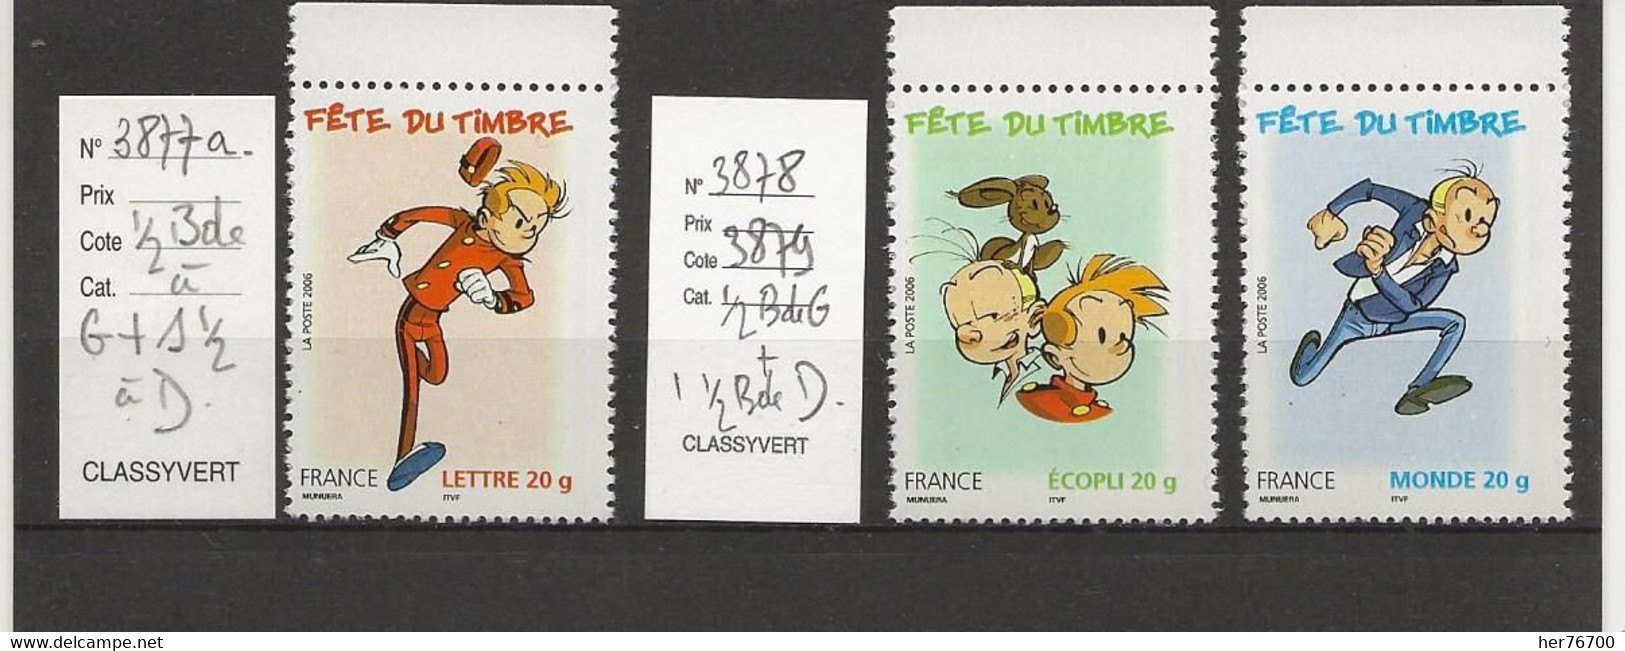 TIMBRE GOMME  YVERT N° 3877a  3878  3879 - Unused Stamps